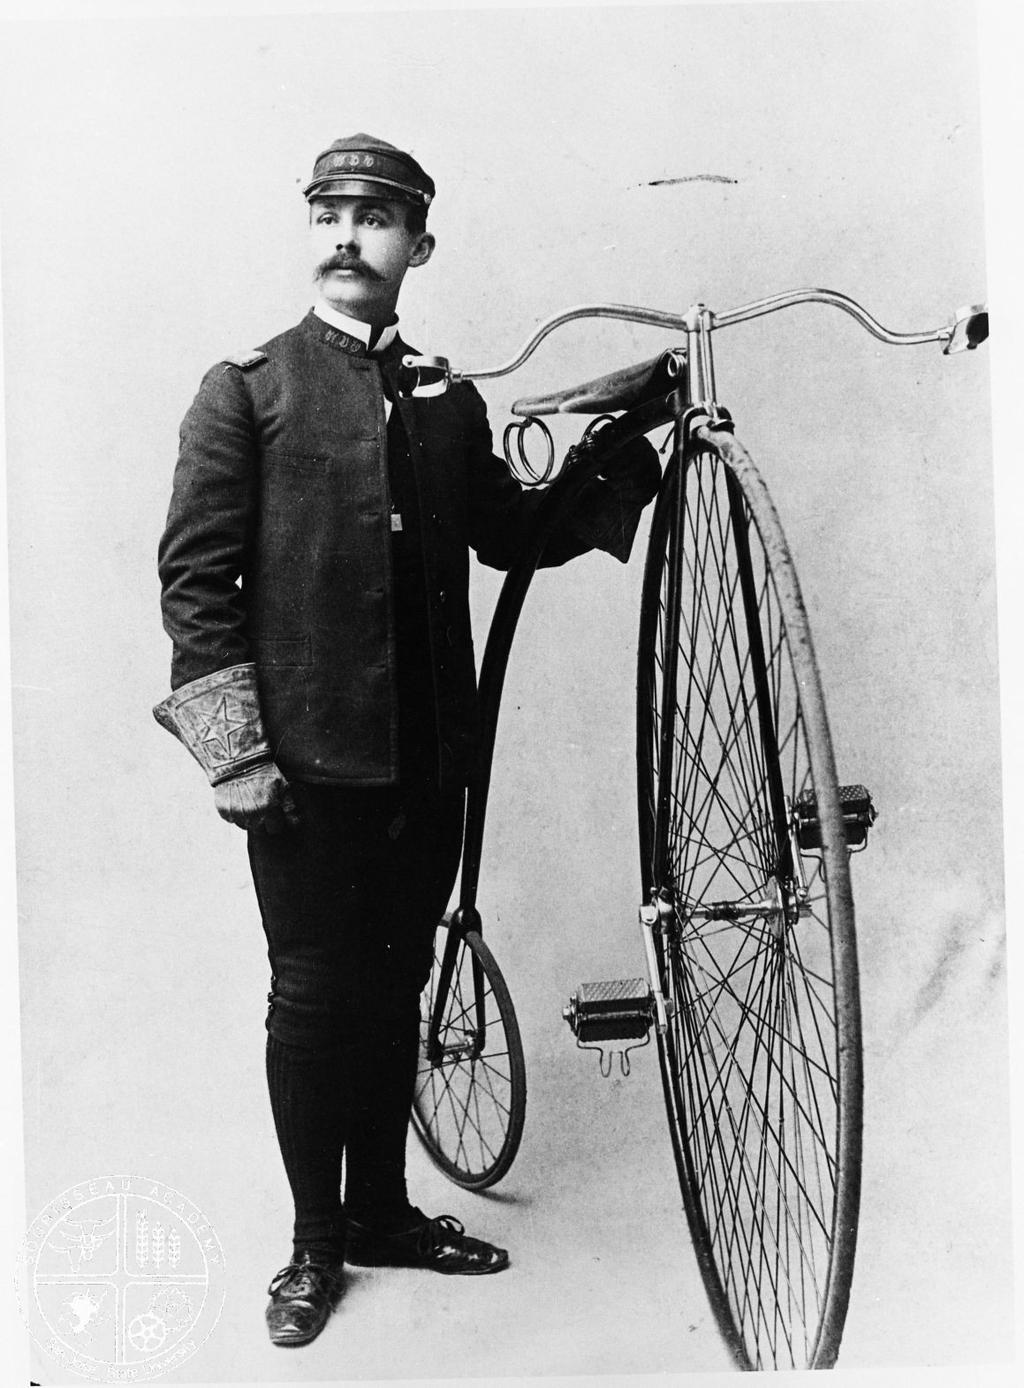 [16] George Owen and his Ordinary, circa 1891. High wheel bicycles, also called ordinaries, introduced cycling to Santa Clara County in the 1880s.